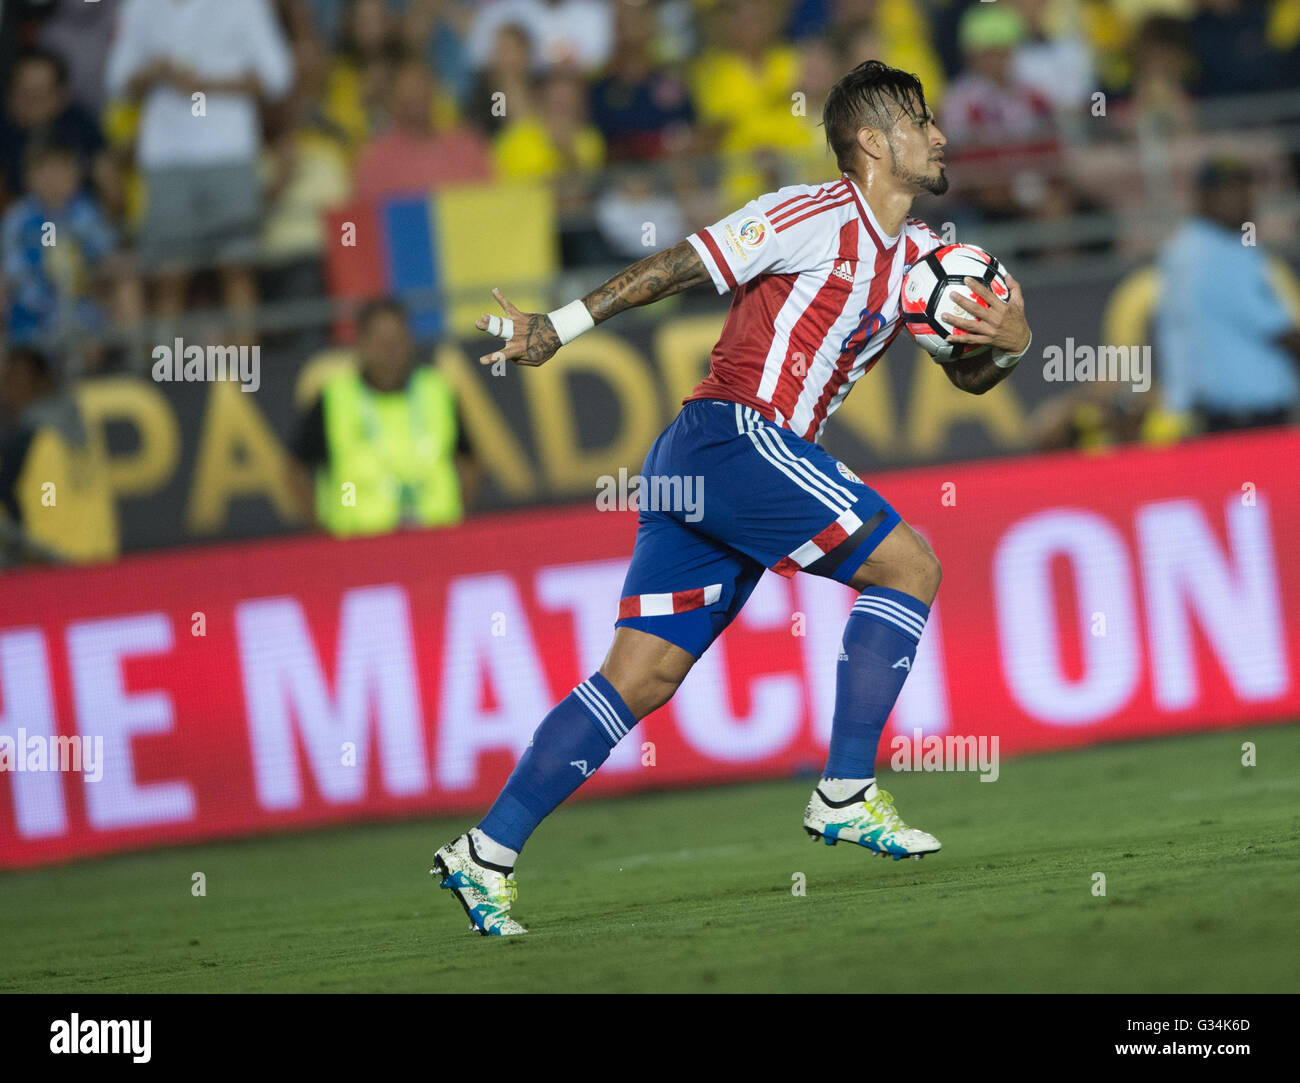 Pasadena, USA. 7th June, 2016. Paraguay's Victor Ayala holds a ball during the Copa America Centenario Group A match between Colombia and Paraguay at Rose Bowl Stadium in Pasadena, California, the United States, June 7, 2016. © Yang Lei/Xinhua/Alamy Live News Stock Photo